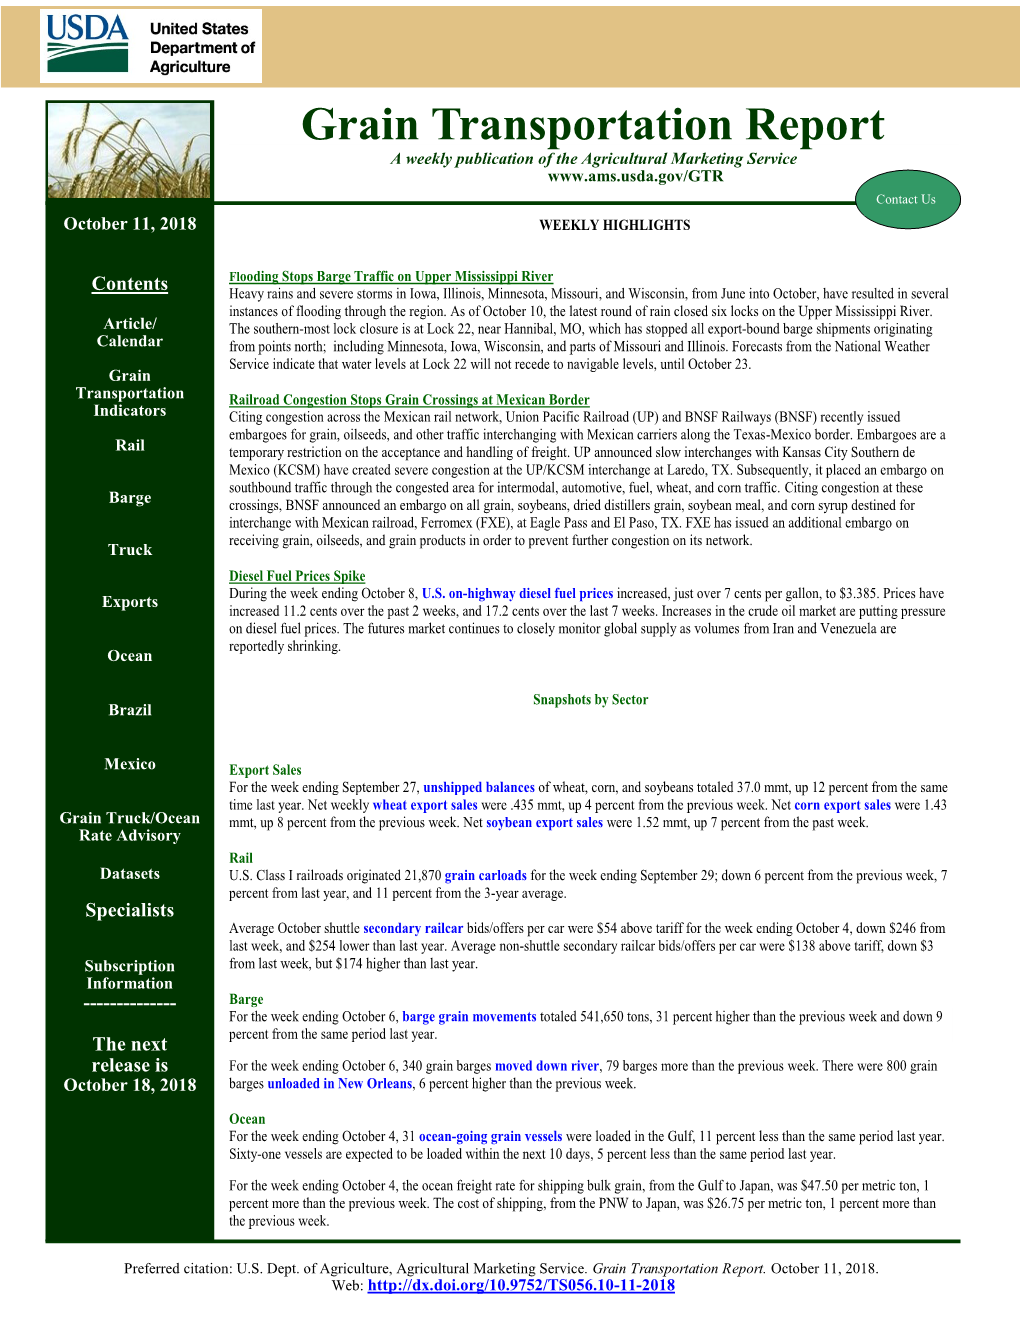 Grain Transportation Report a Weekly Publication of the Agricultural Marketing Service Contact Us October 11, 2018 WEEKLY HIGHLIGHTS